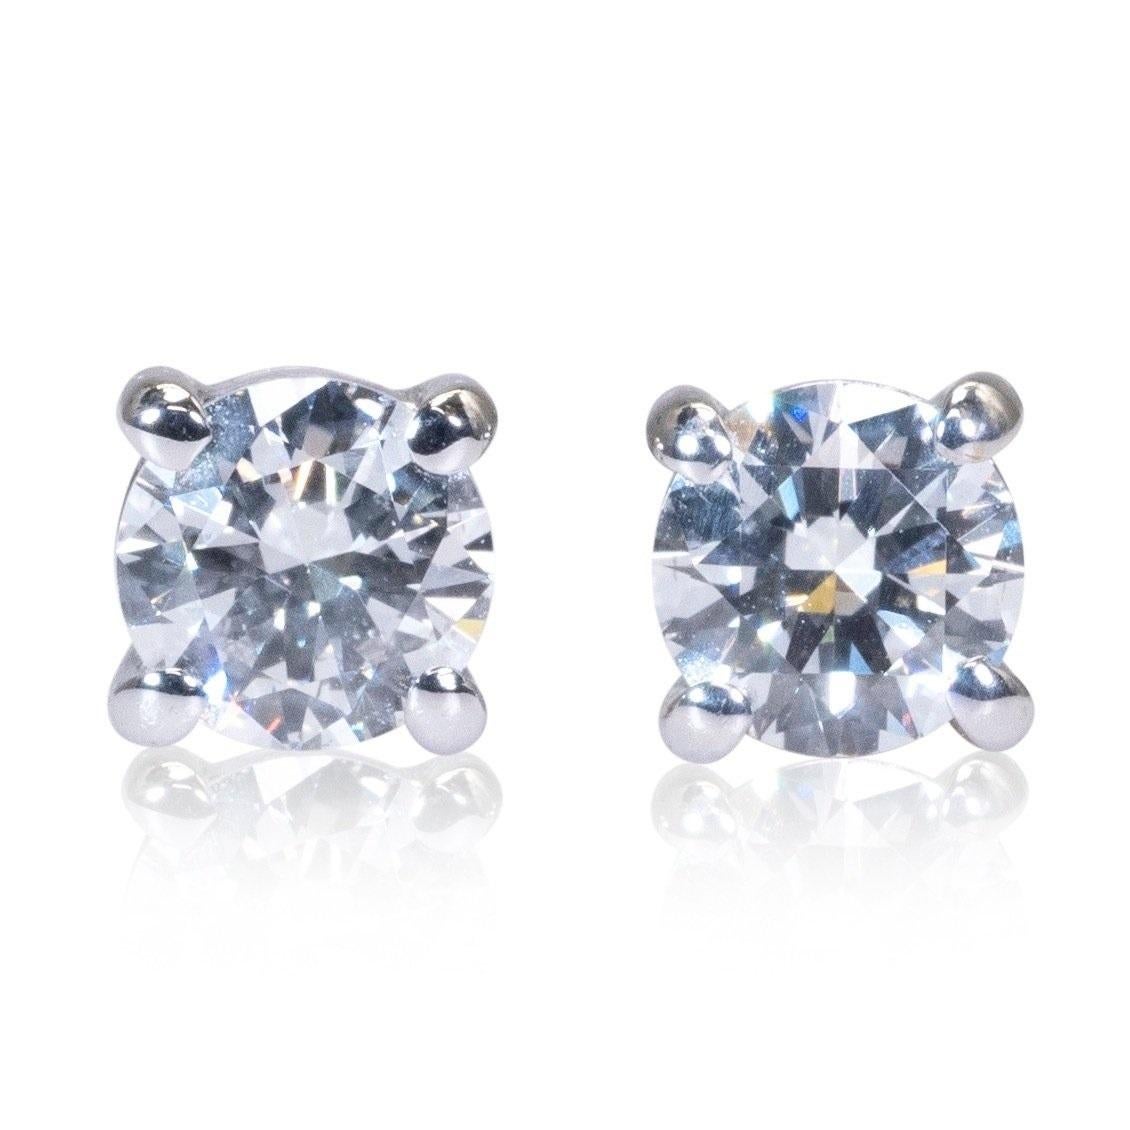 Sparkling 18K White Gold Stud Earrings with 0.31 ct Natural Diamonds, GIA Cert In New Condition For Sale In רמת גן, IL